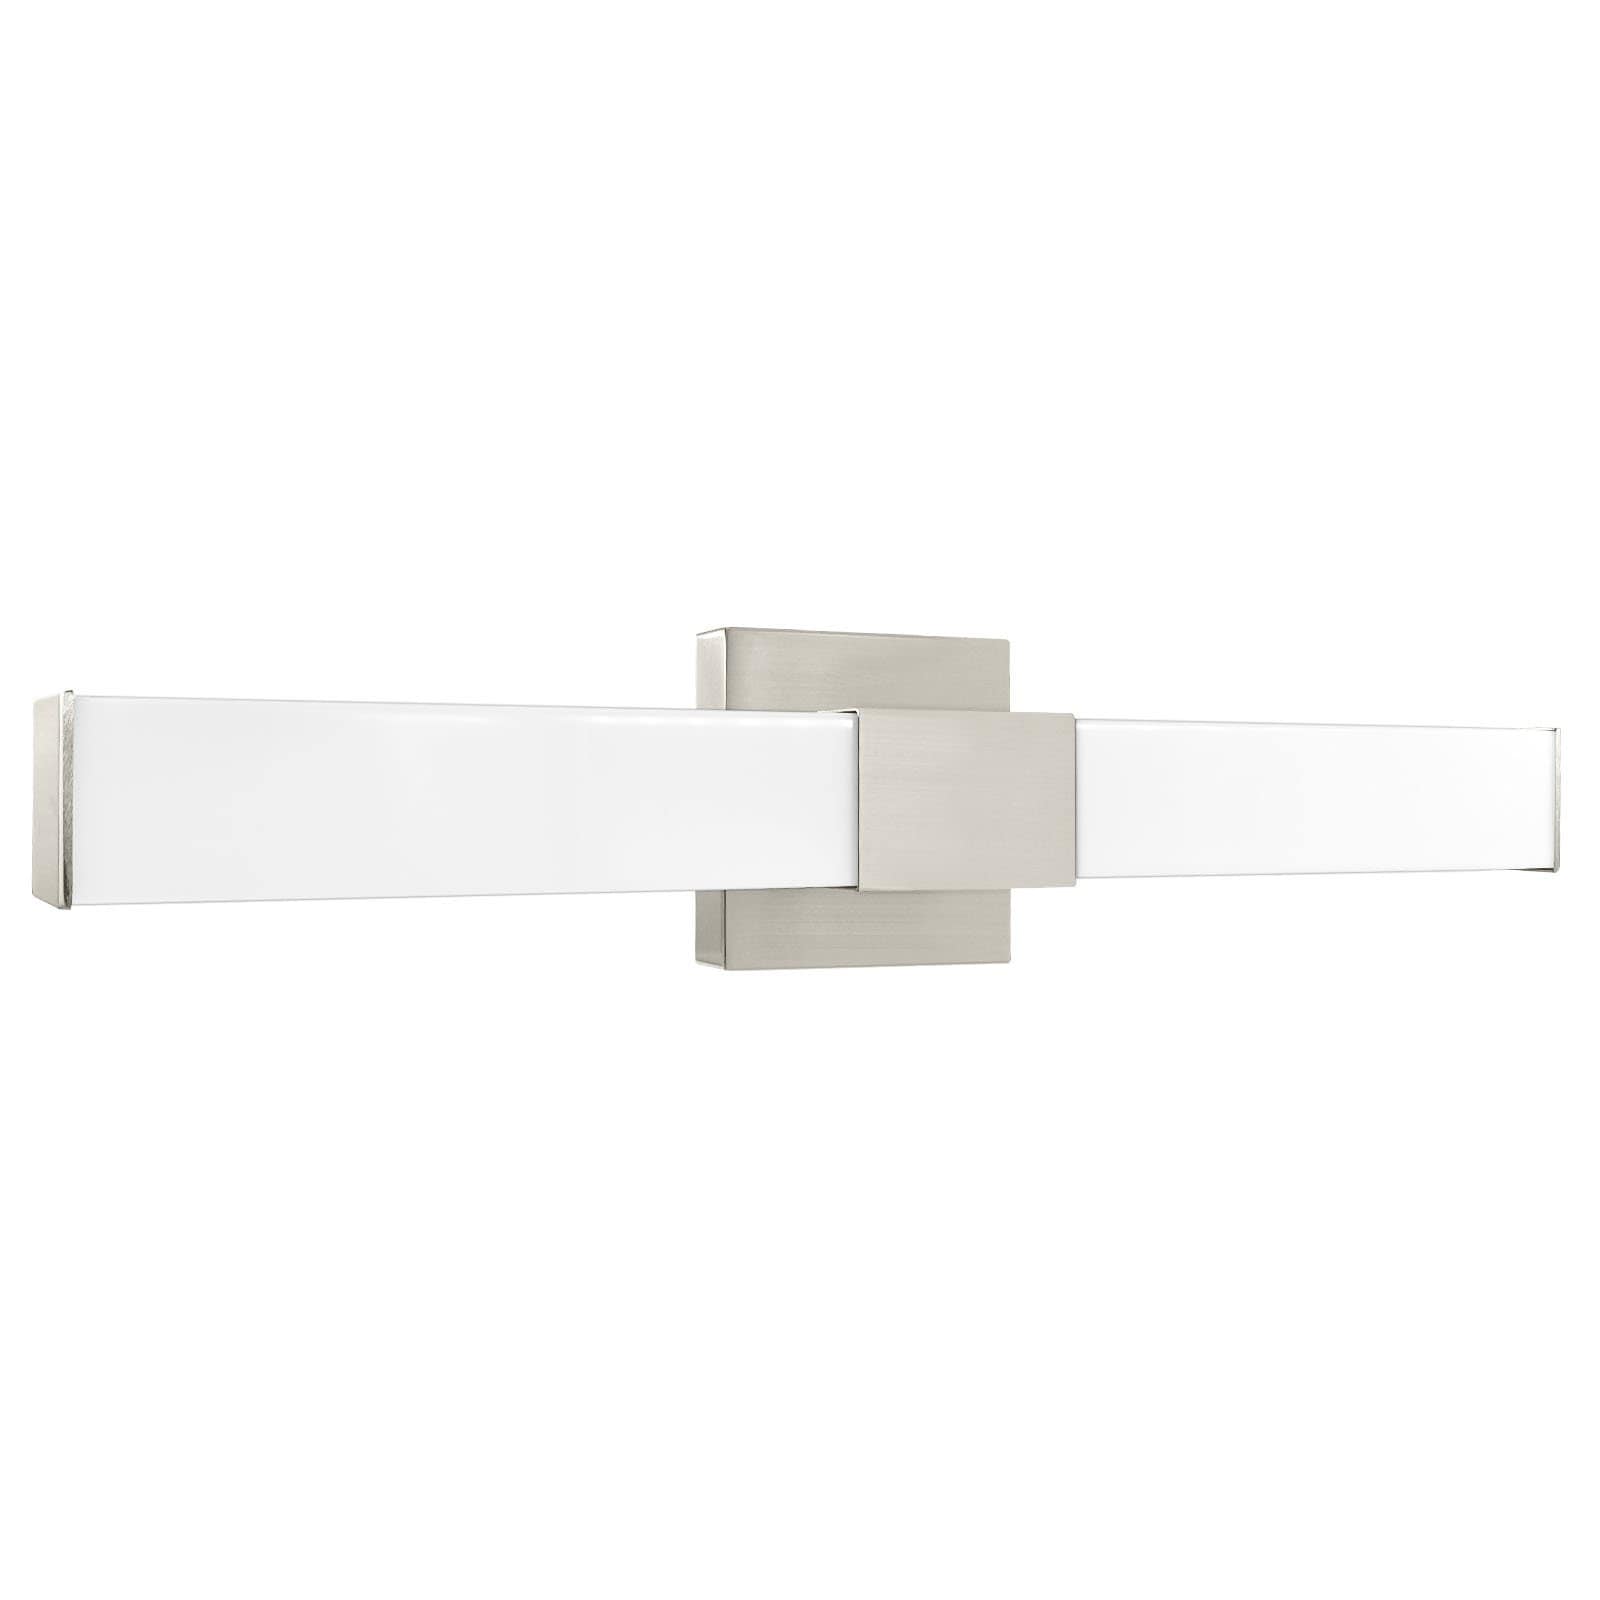 Luxrite LED Bathroom Vanity Light Fixtures Square 24 Inch Brushed Nickel  CCT 2700K-5000K 24W 1500 Lumens Dimmable Bed Bath  Beyond 38036786